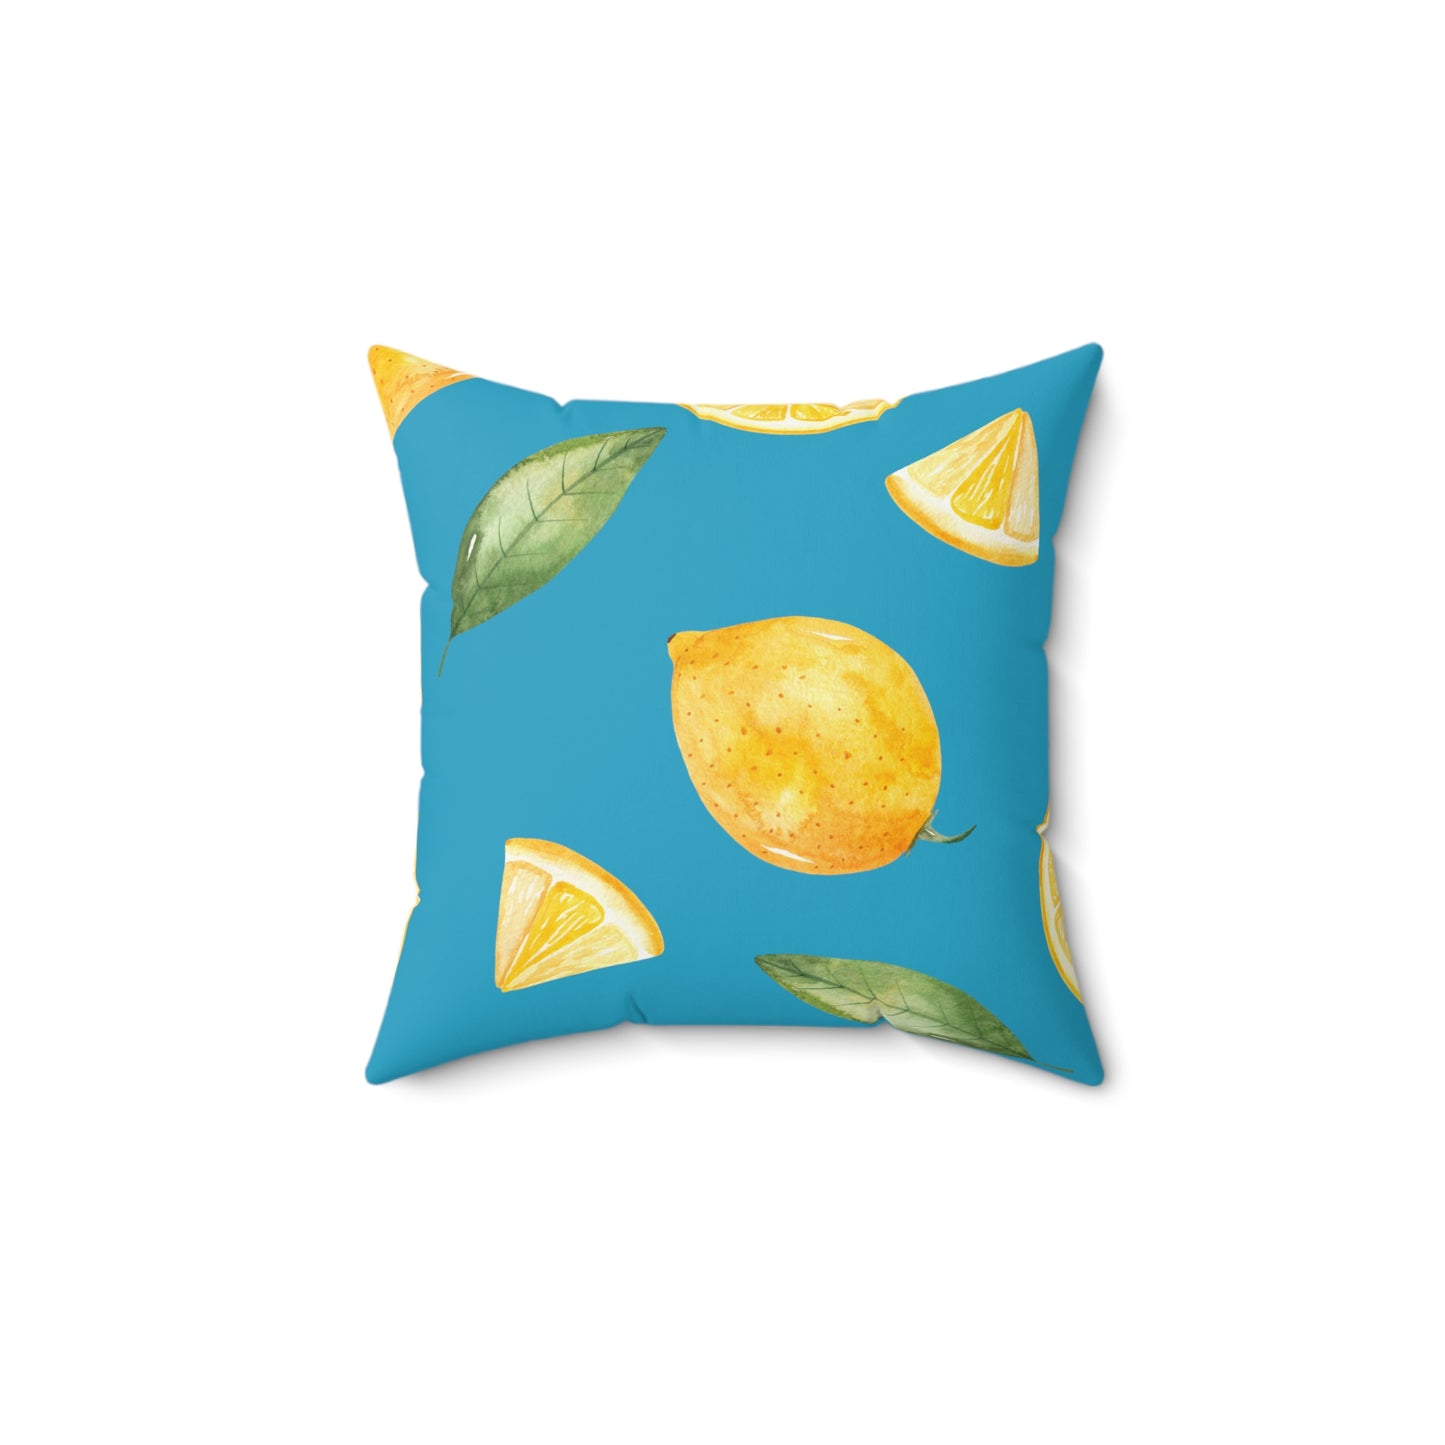 Give me Lemons Pillow -  Spun Polyester Square Throw Pillow with Zipper and  Insert